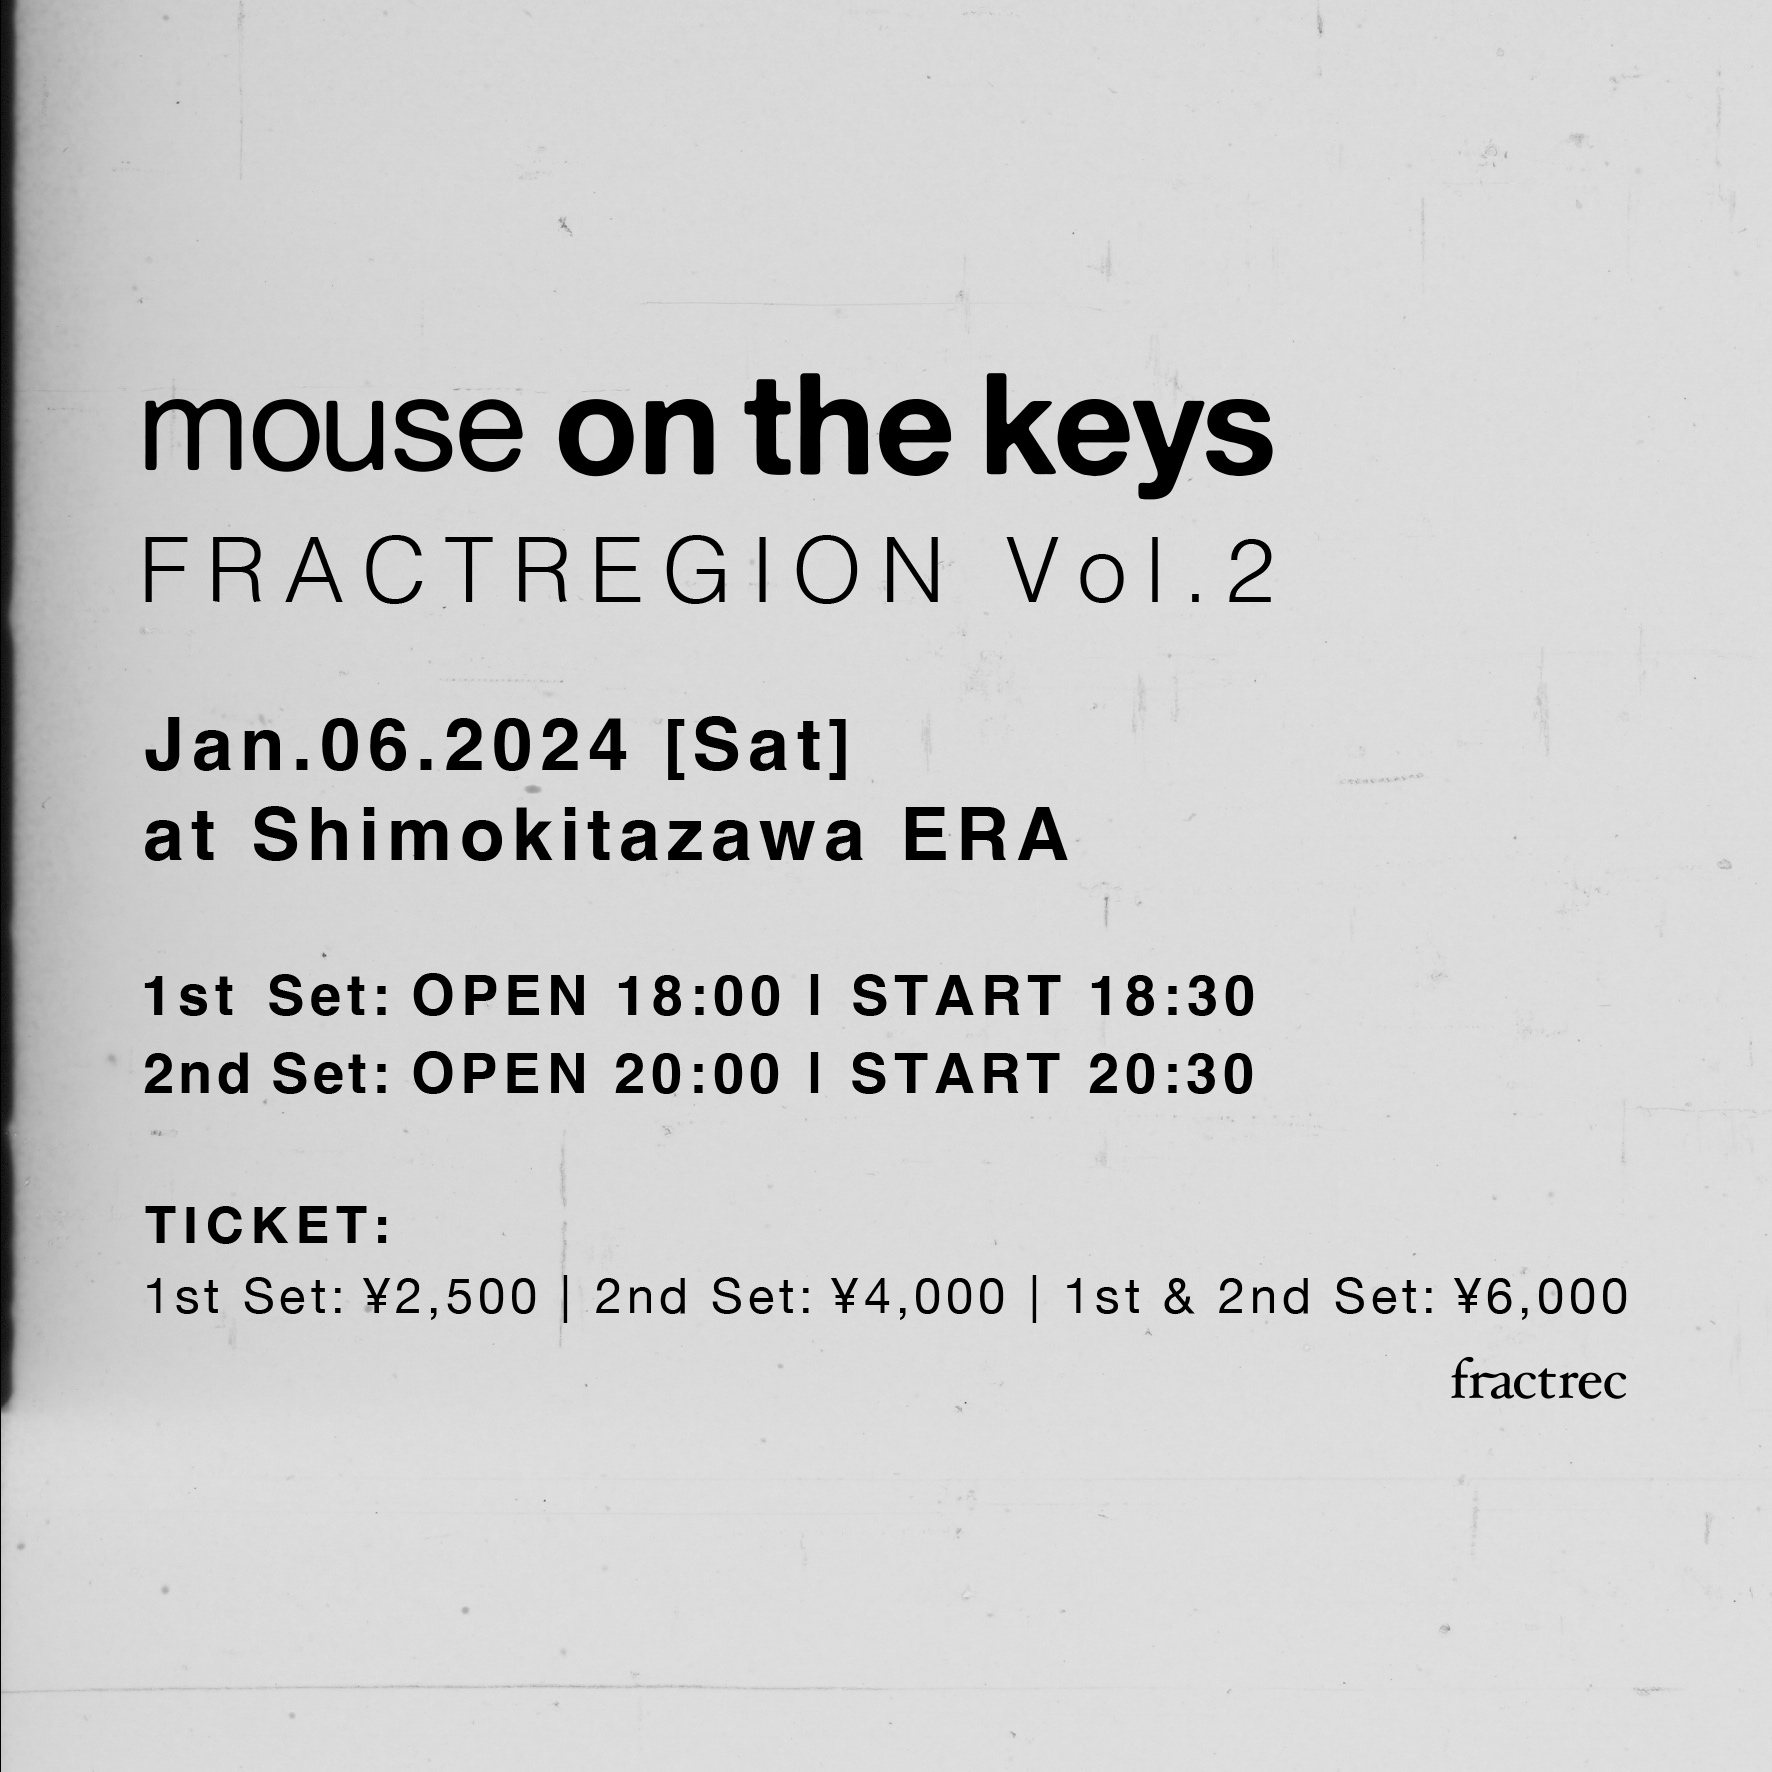 mouse on the keys  “FRACTREGION Vol.2"